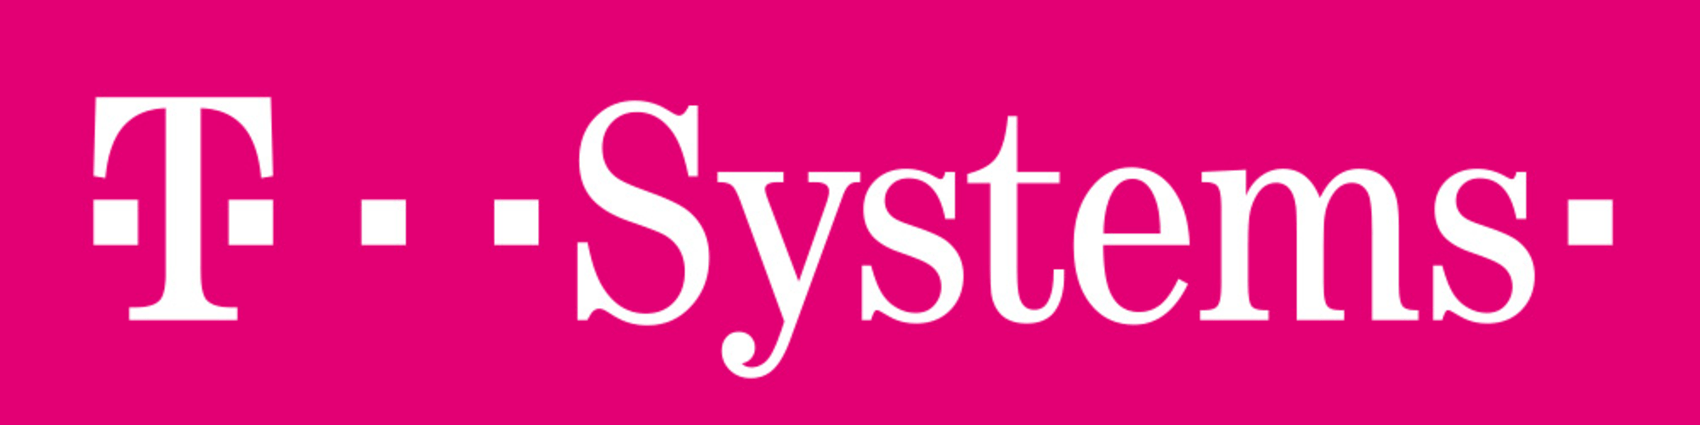 T-Systems Logo - Information And Communication Technology By T Systems